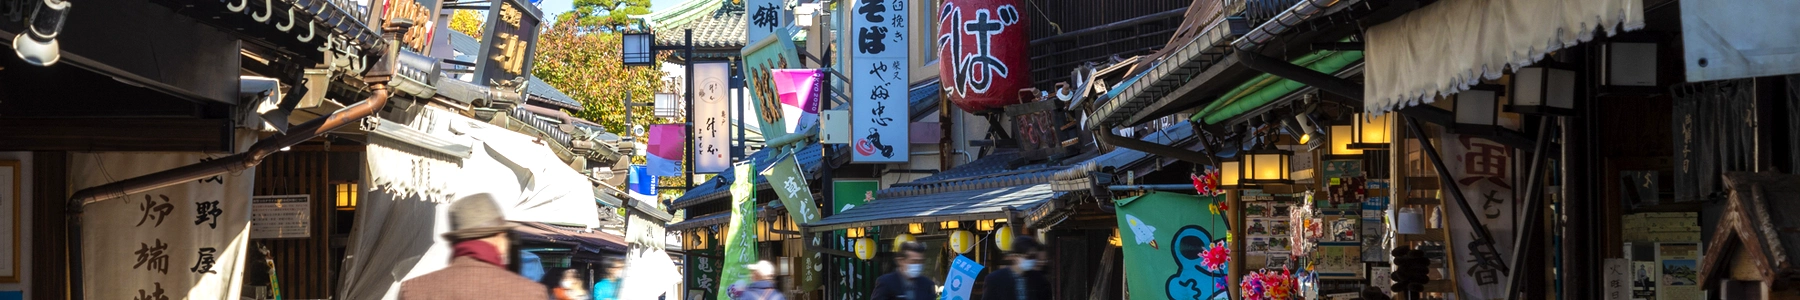 A slow, relaxed walk in Tokyo's retro towns enticed by famous foods